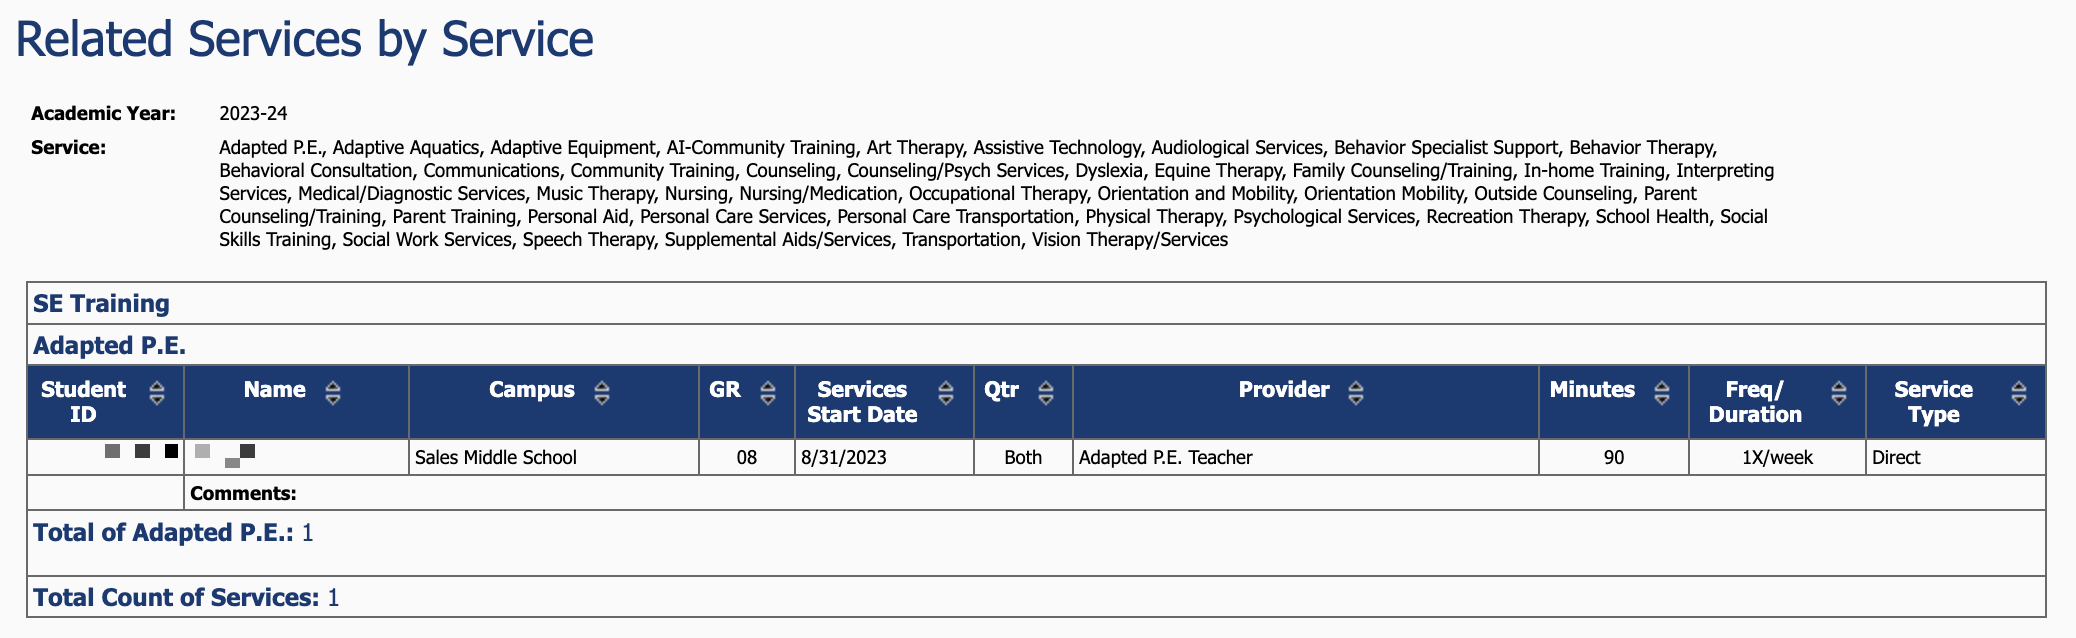 services by service report.png